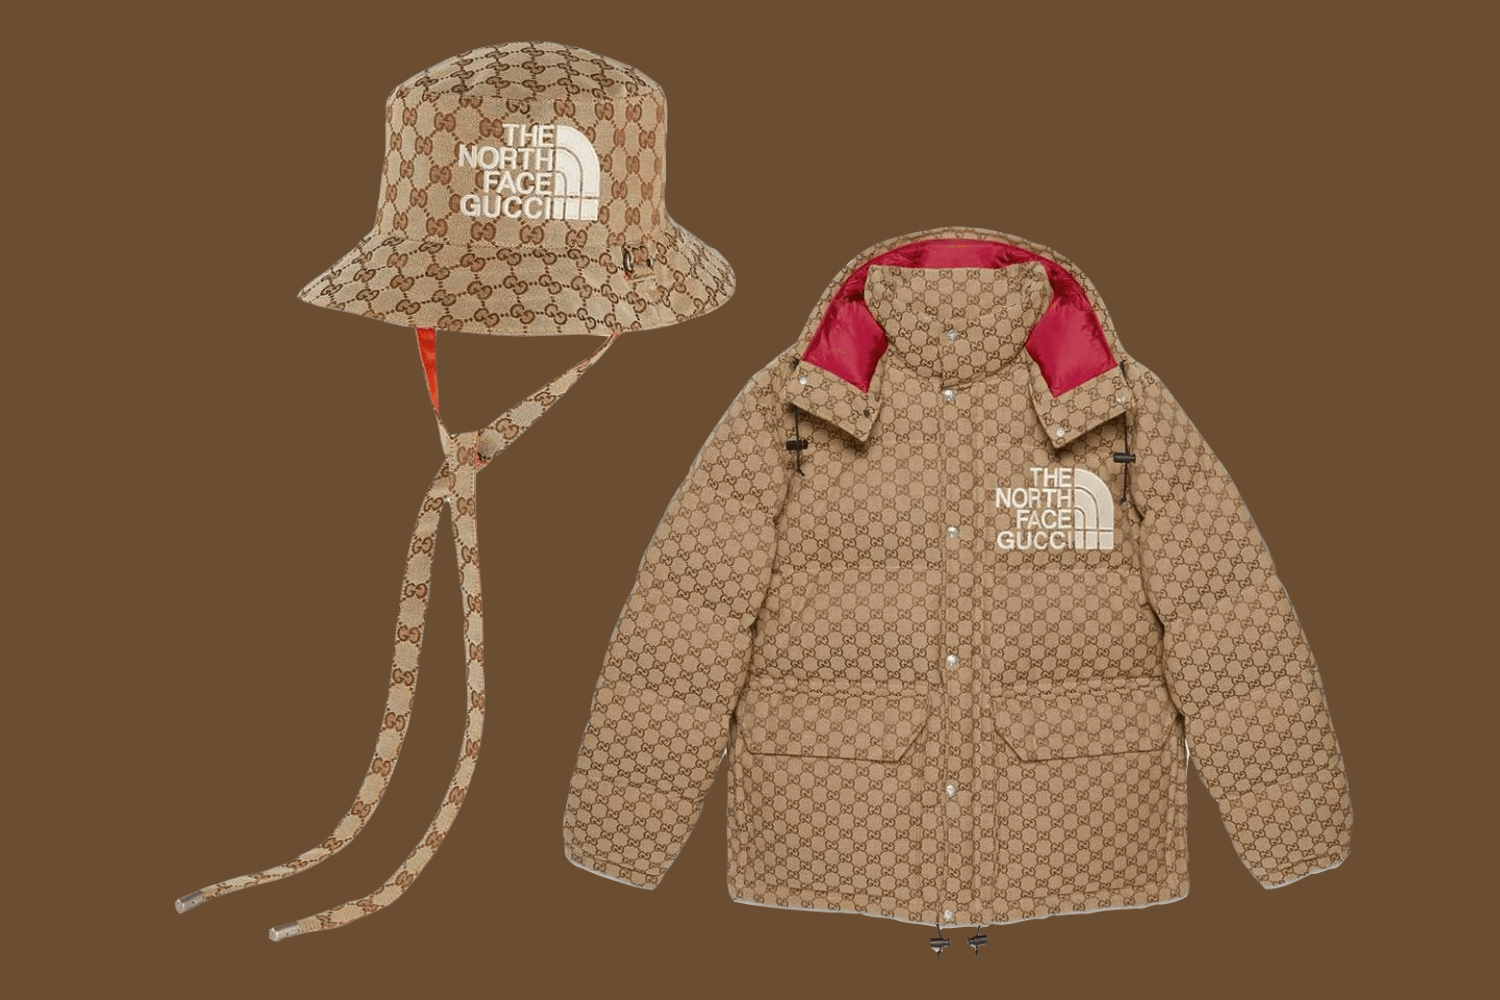 Gucci x The North Face collab comes with new collection